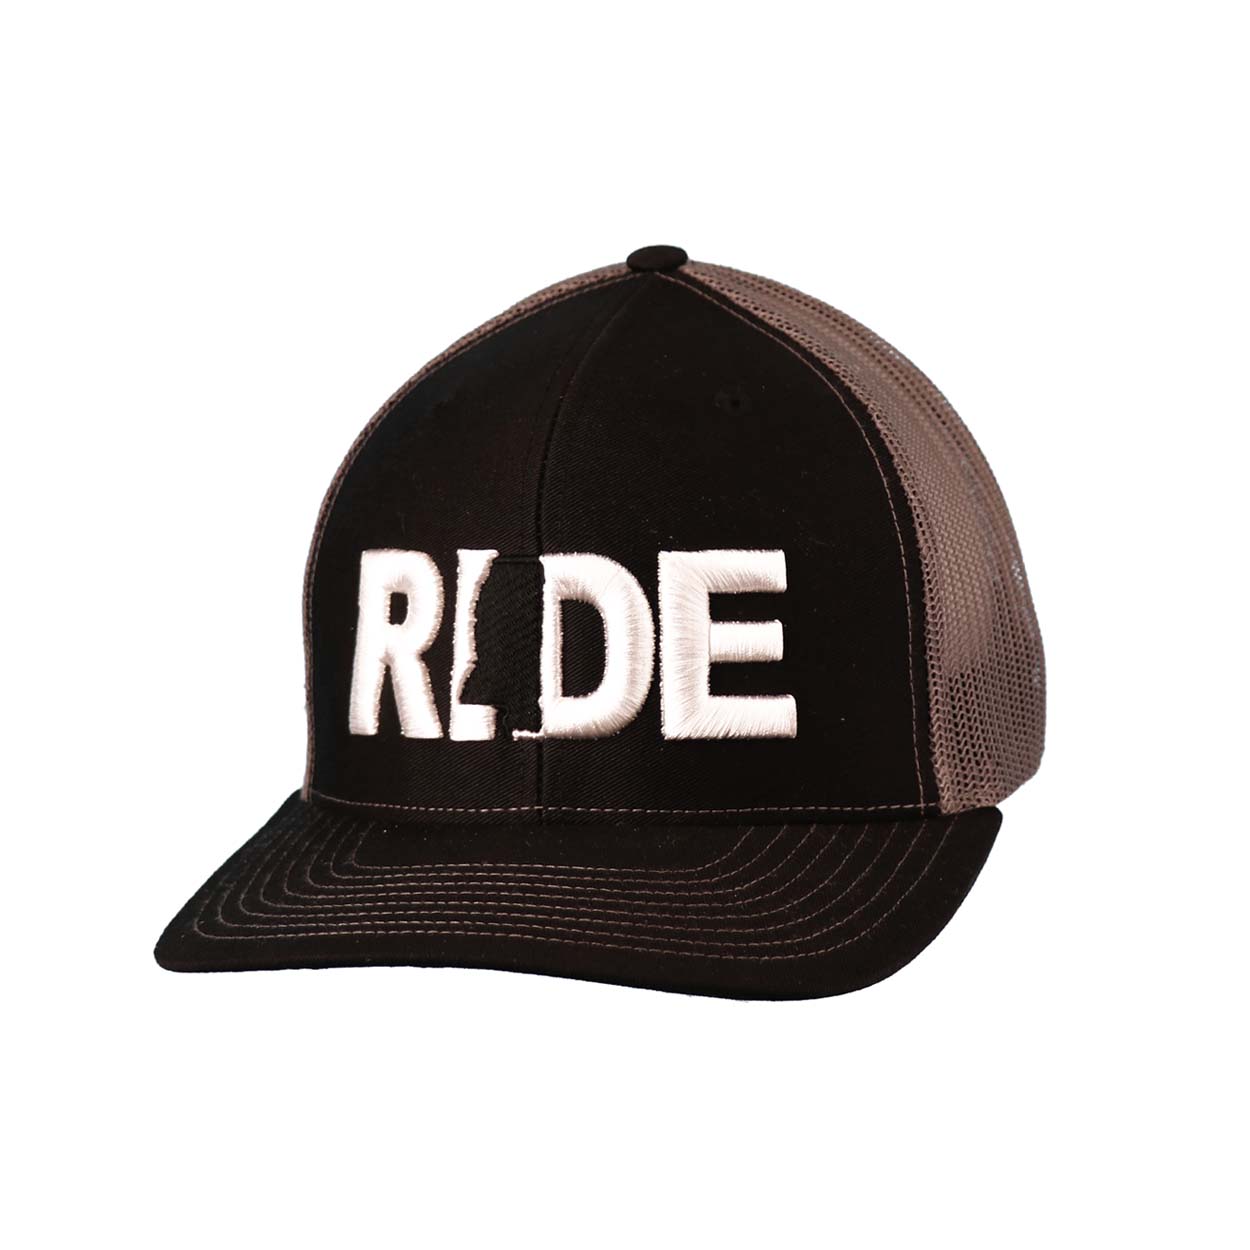 Ride Mississippi Classic Embroidered Snapback Trucker Hat Black/Charcoal